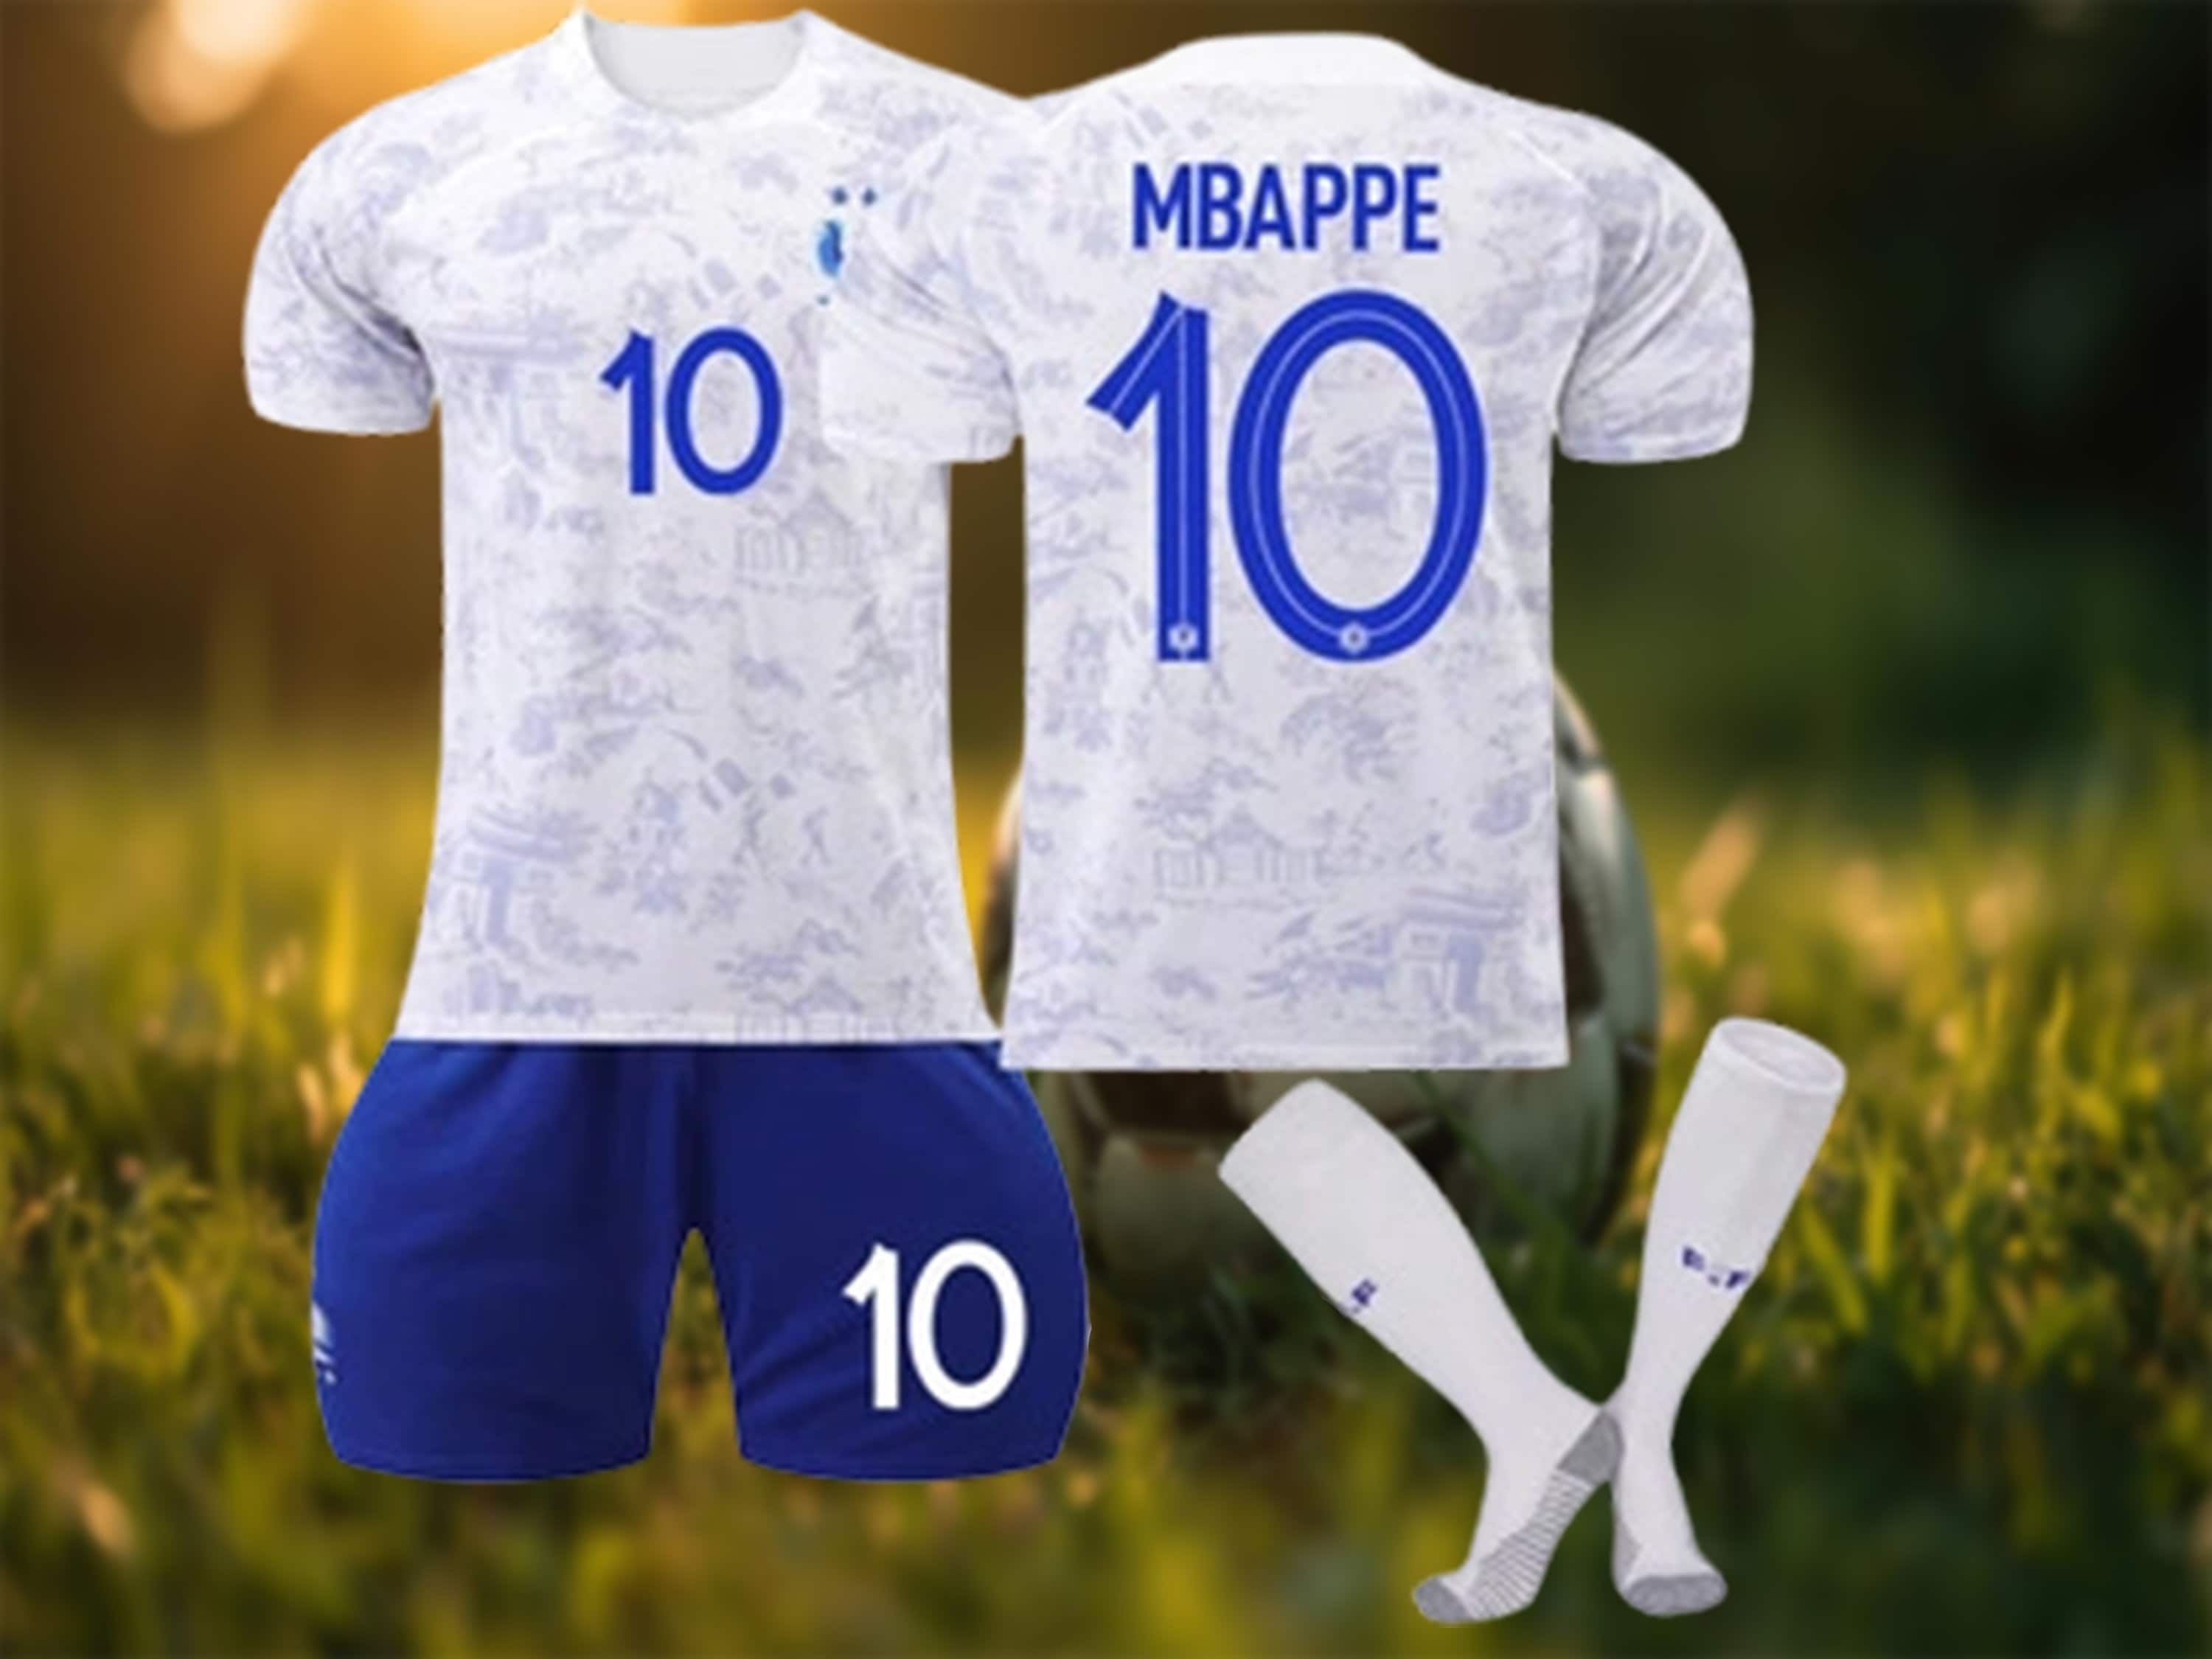 Kylian Mbappe Jersey Photorealistic Thermal Print Soccer 